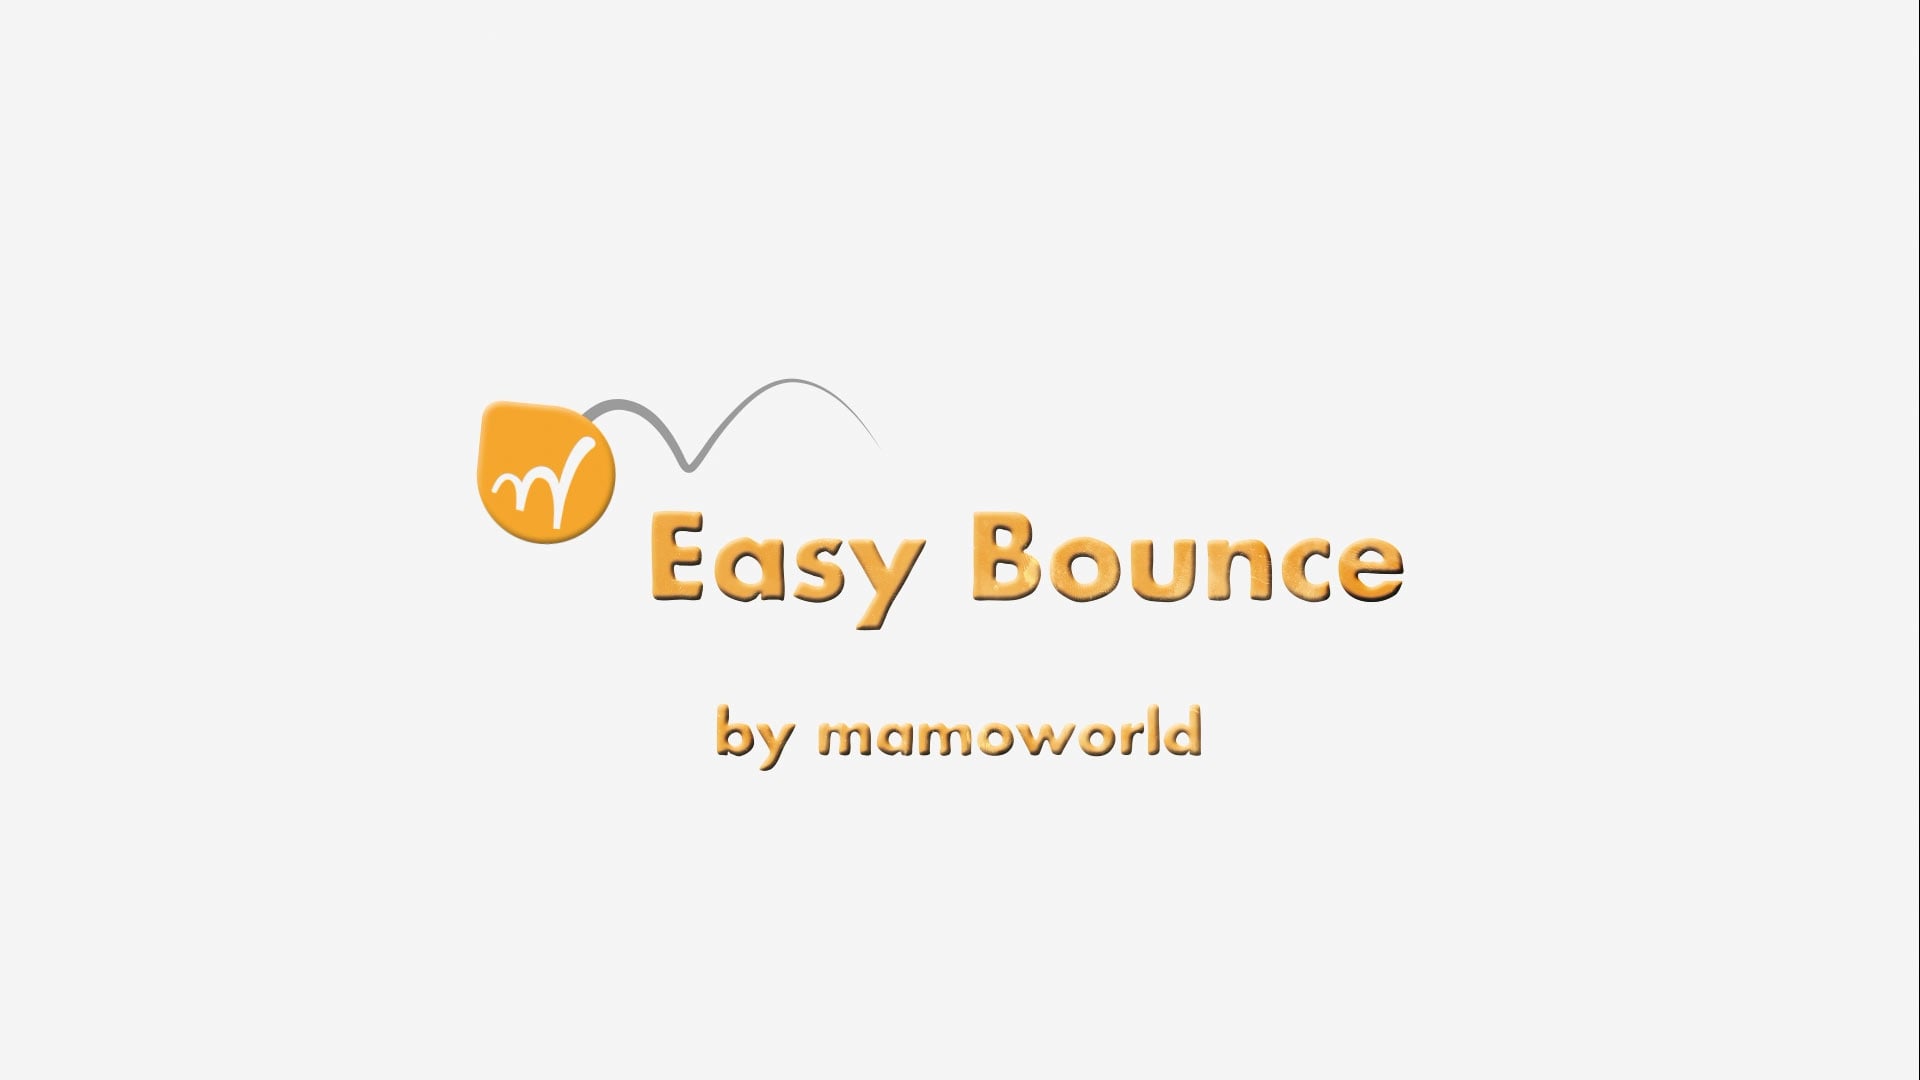 bounce after effects plugin free download